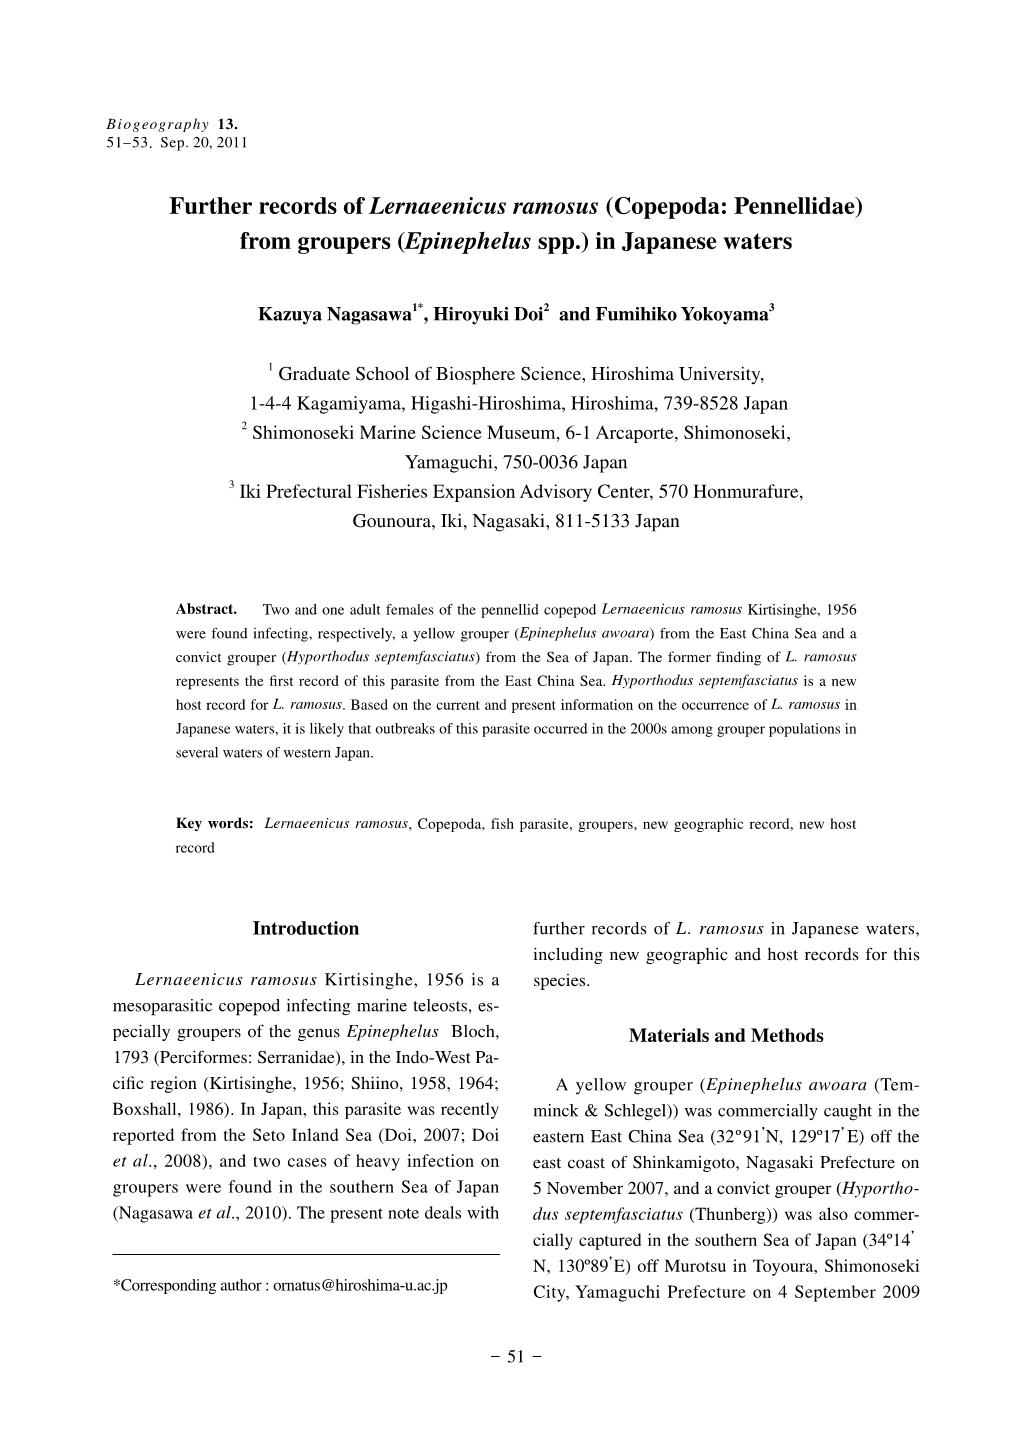 Further Records of Lernaeenicus Ramosus (Copepoda: Pennellidae) from Groupers (Epinephelus Spp.) in Japanese Waters